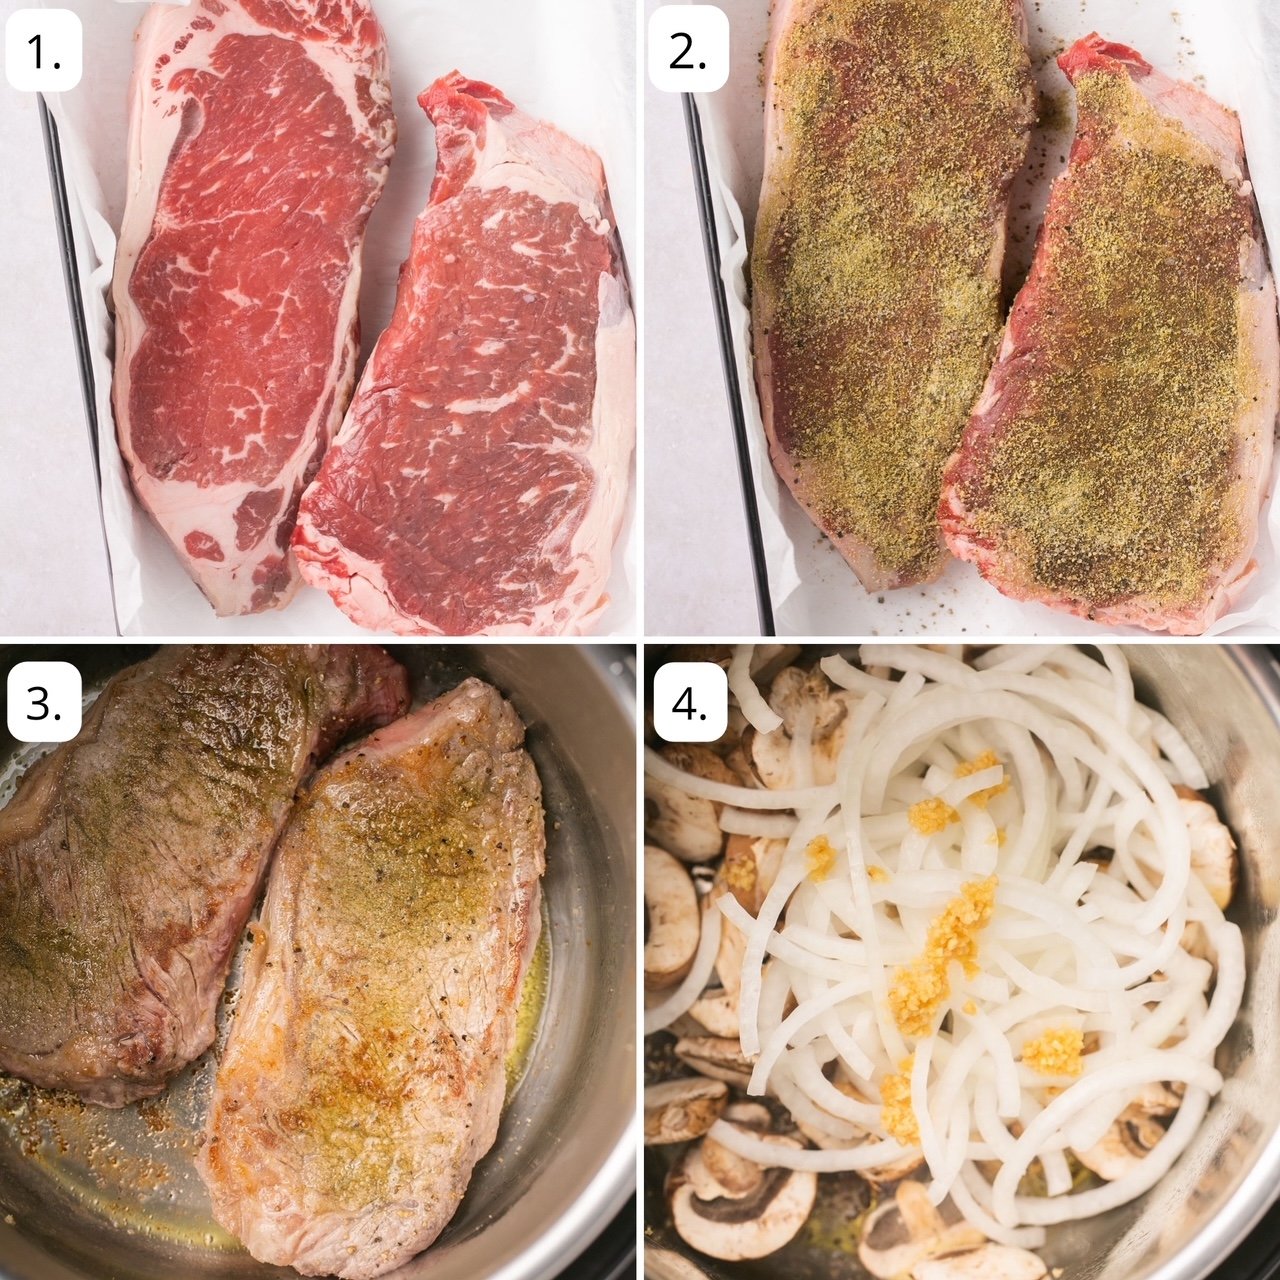 The first four steps for making Instant Pot Steak